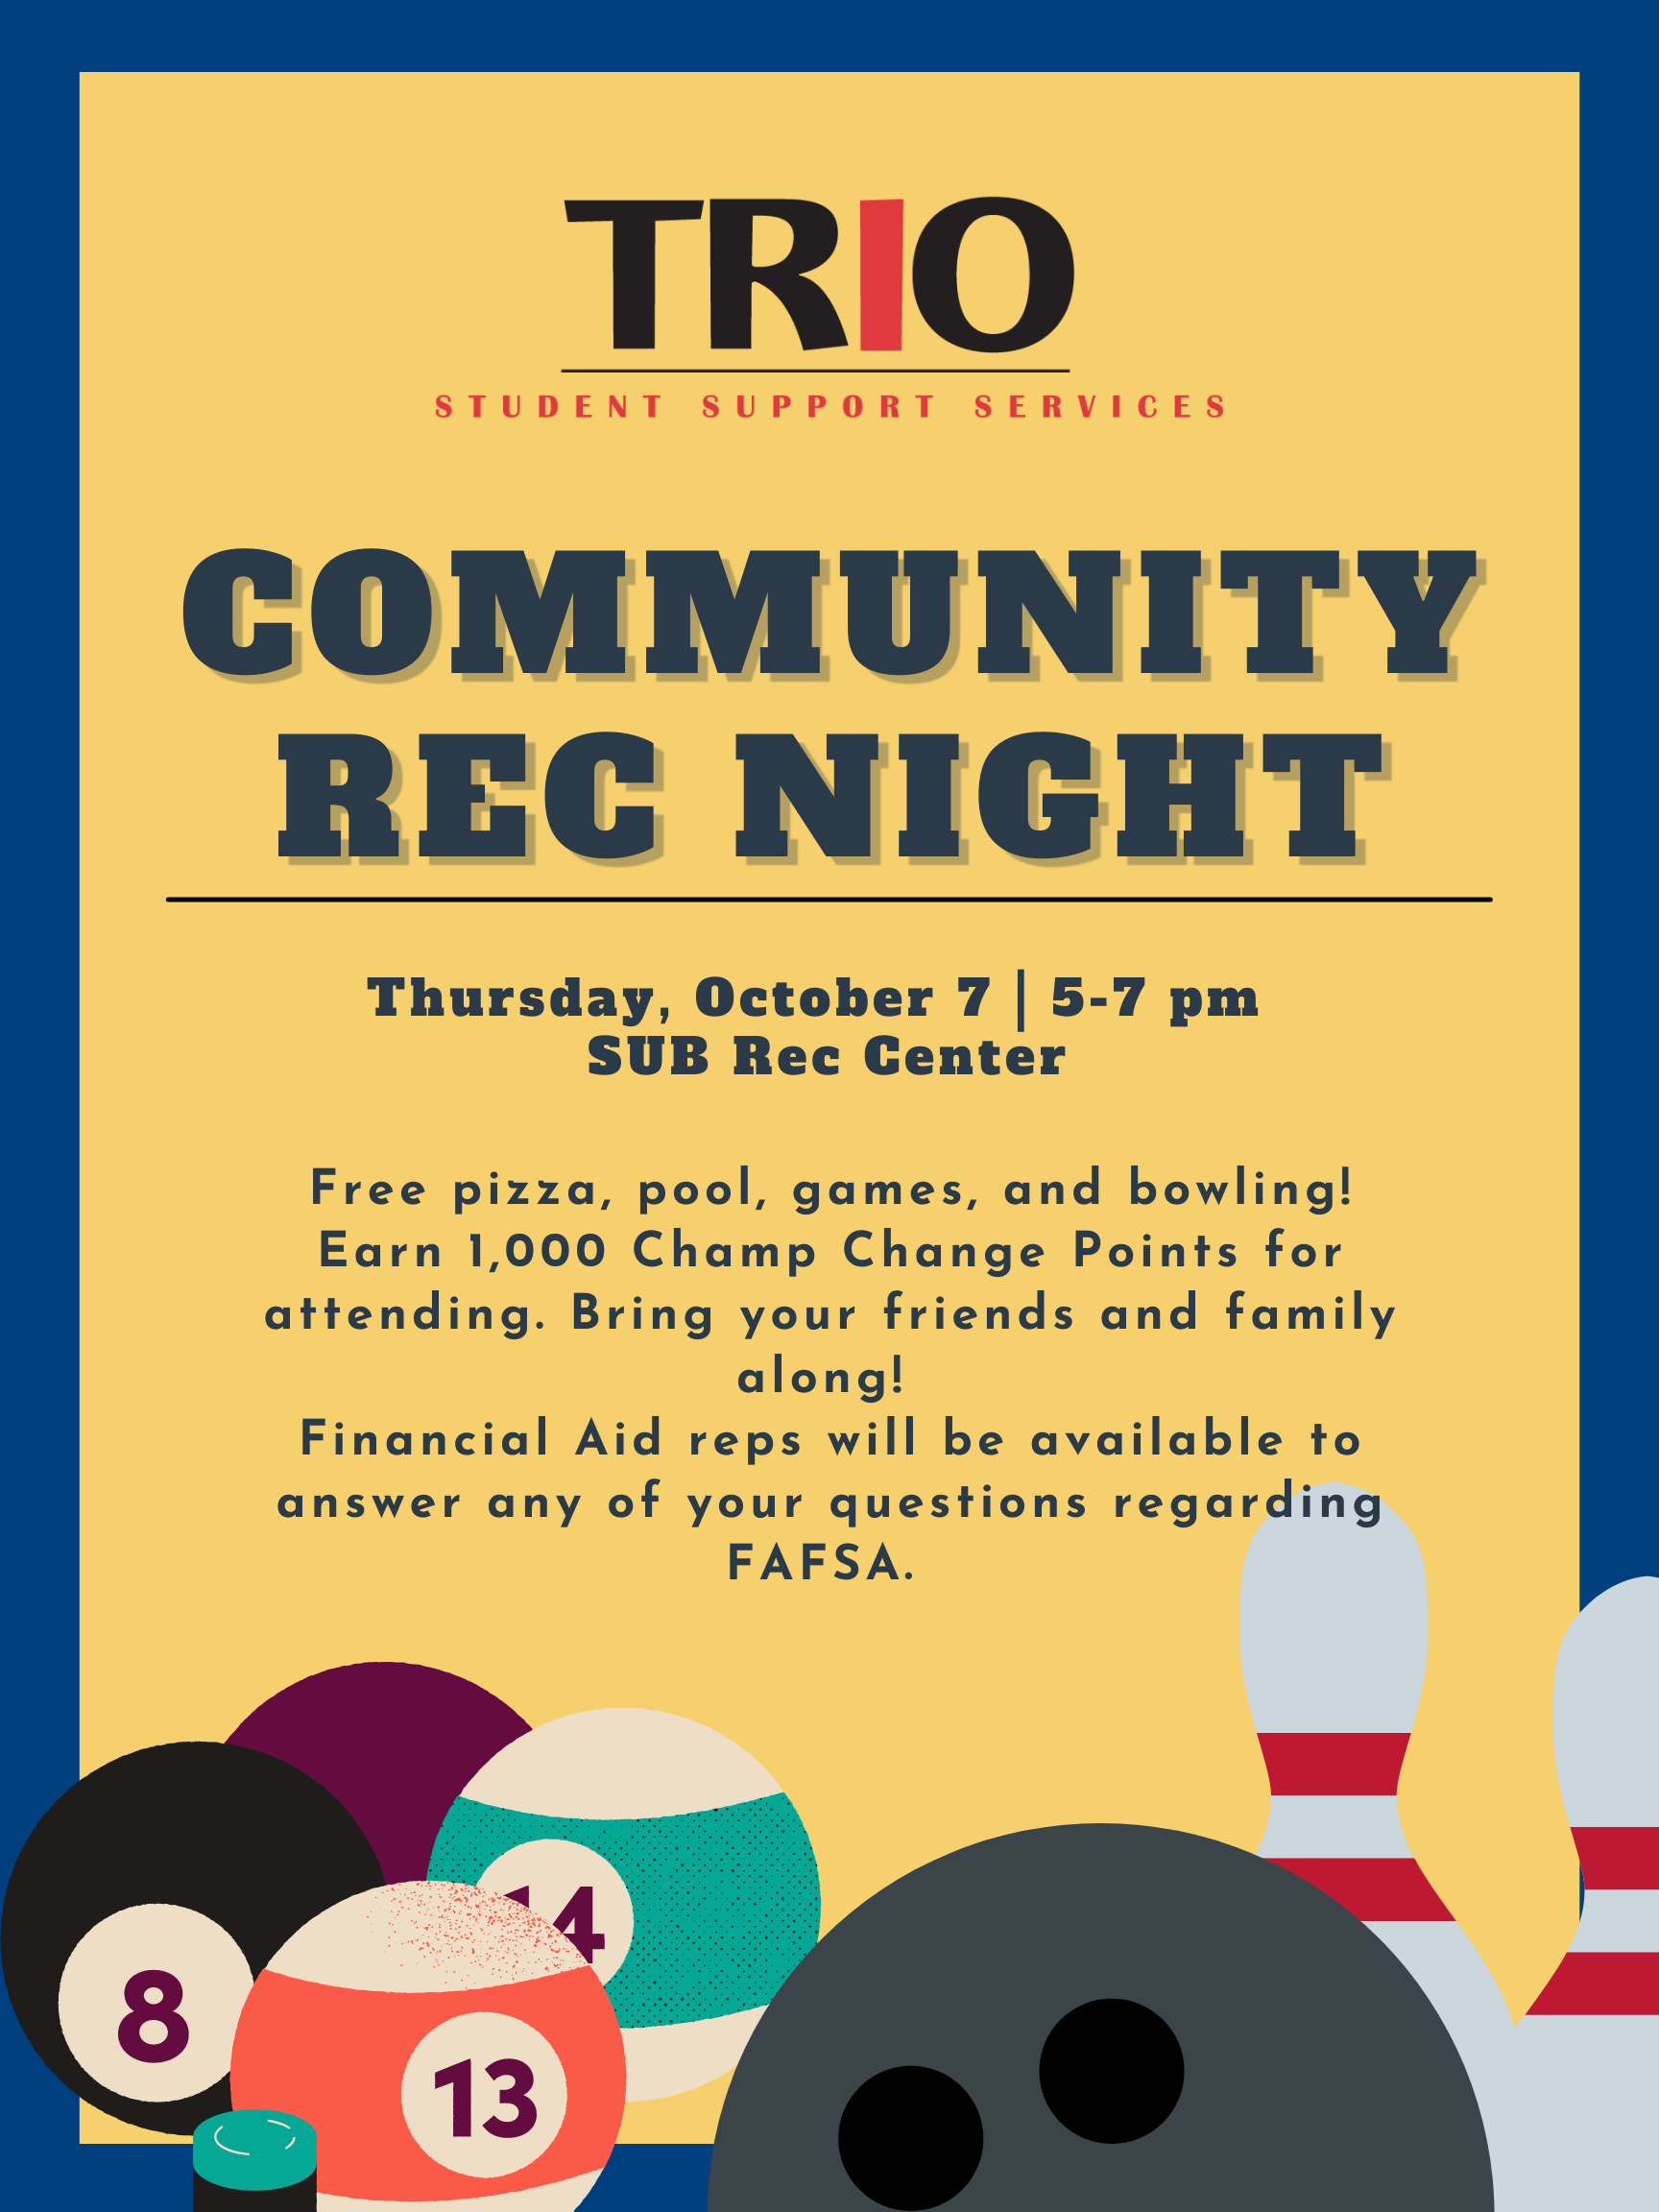 Flyer with pool balls and bowling pins that reads "Community Rec Night"